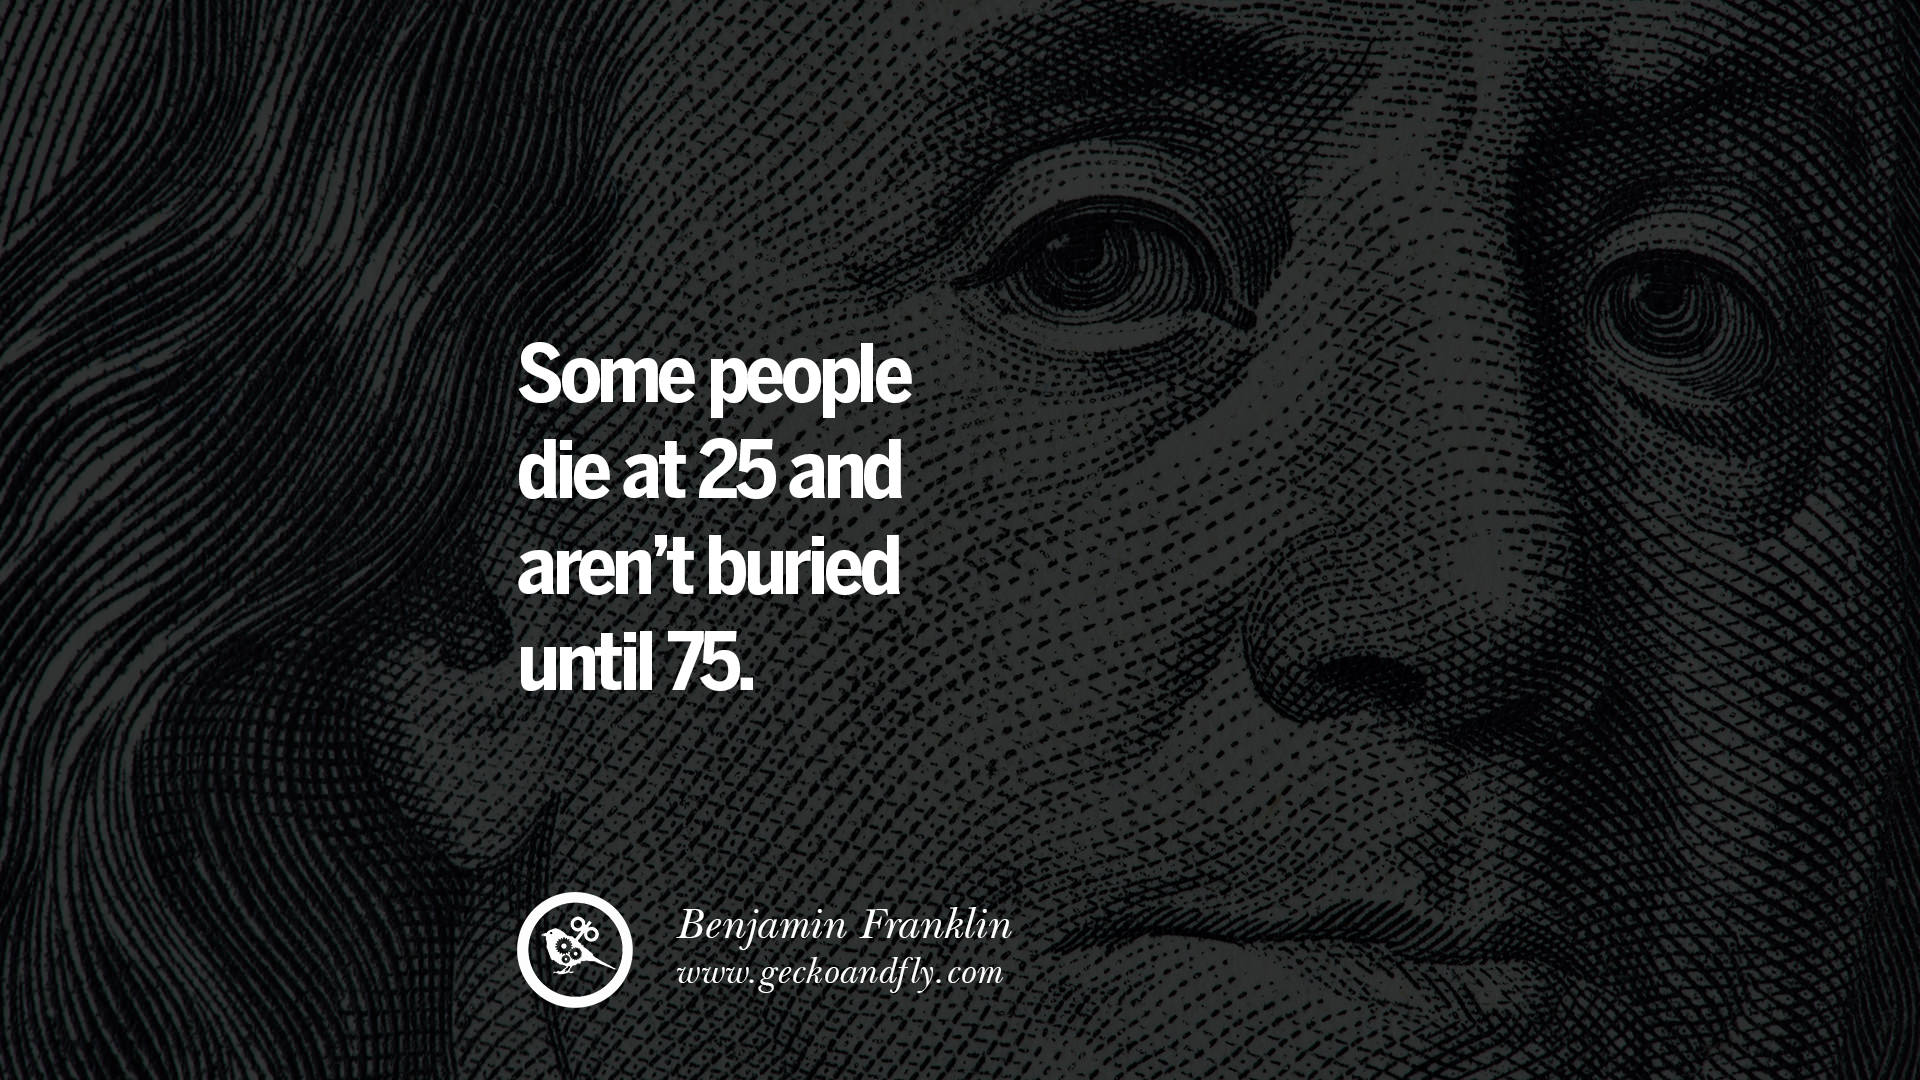 40 Famous Benjamin Franklin Quotes on Knowledge, Opportunities, and Liberty